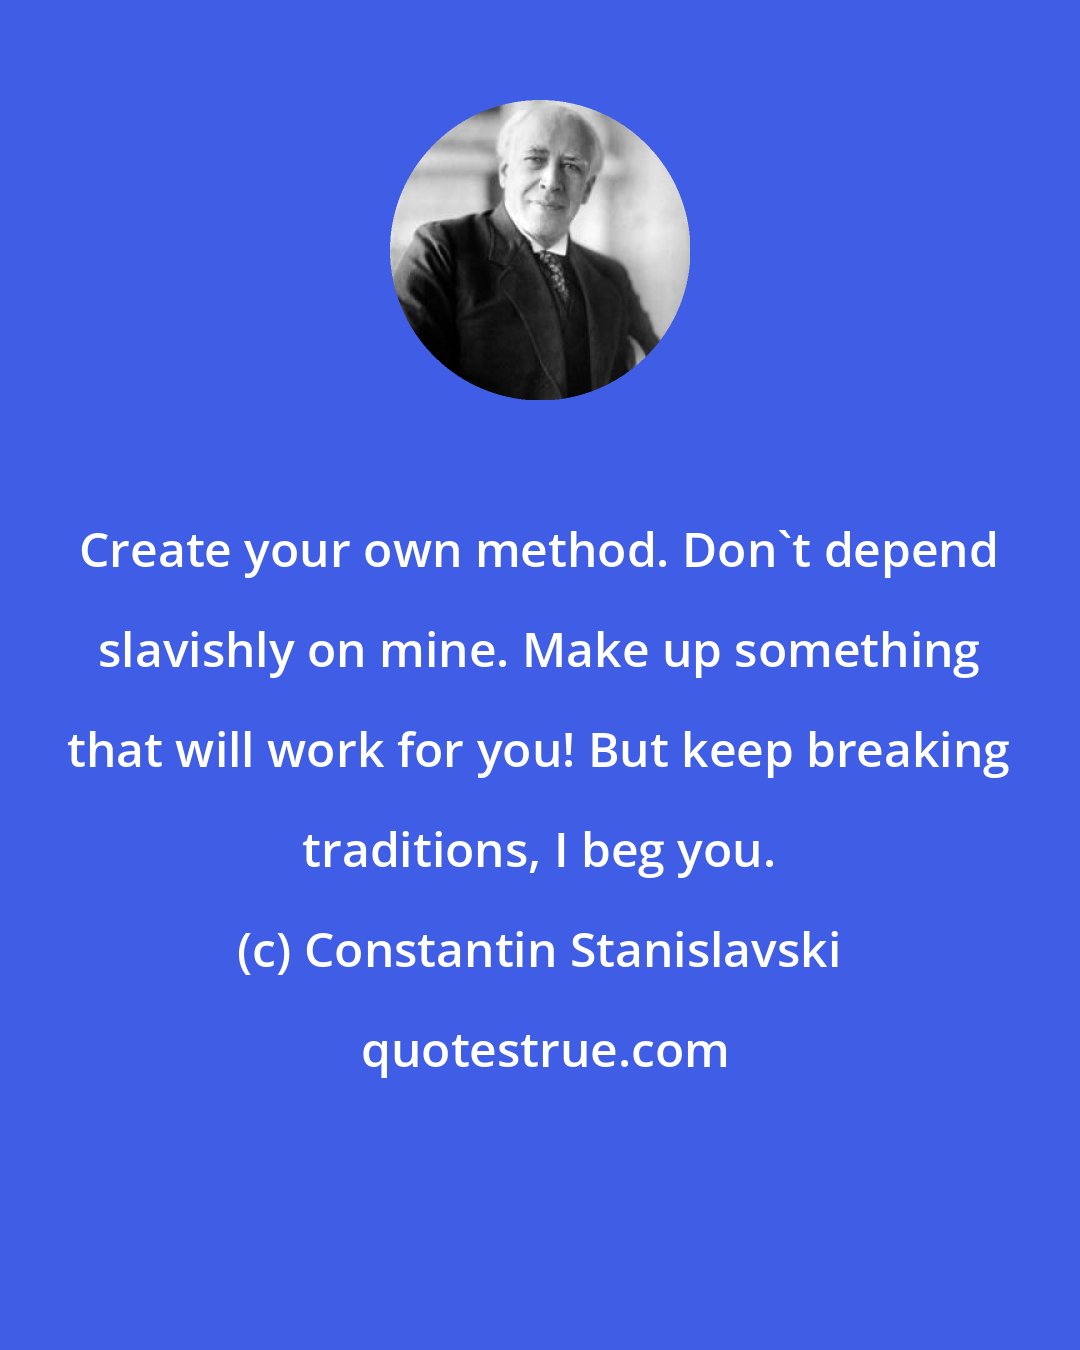 Constantin Stanislavski: Create your own method. Don't depend slavishly on mine. Make up something that will work for you! But keep breaking traditions, I beg you.